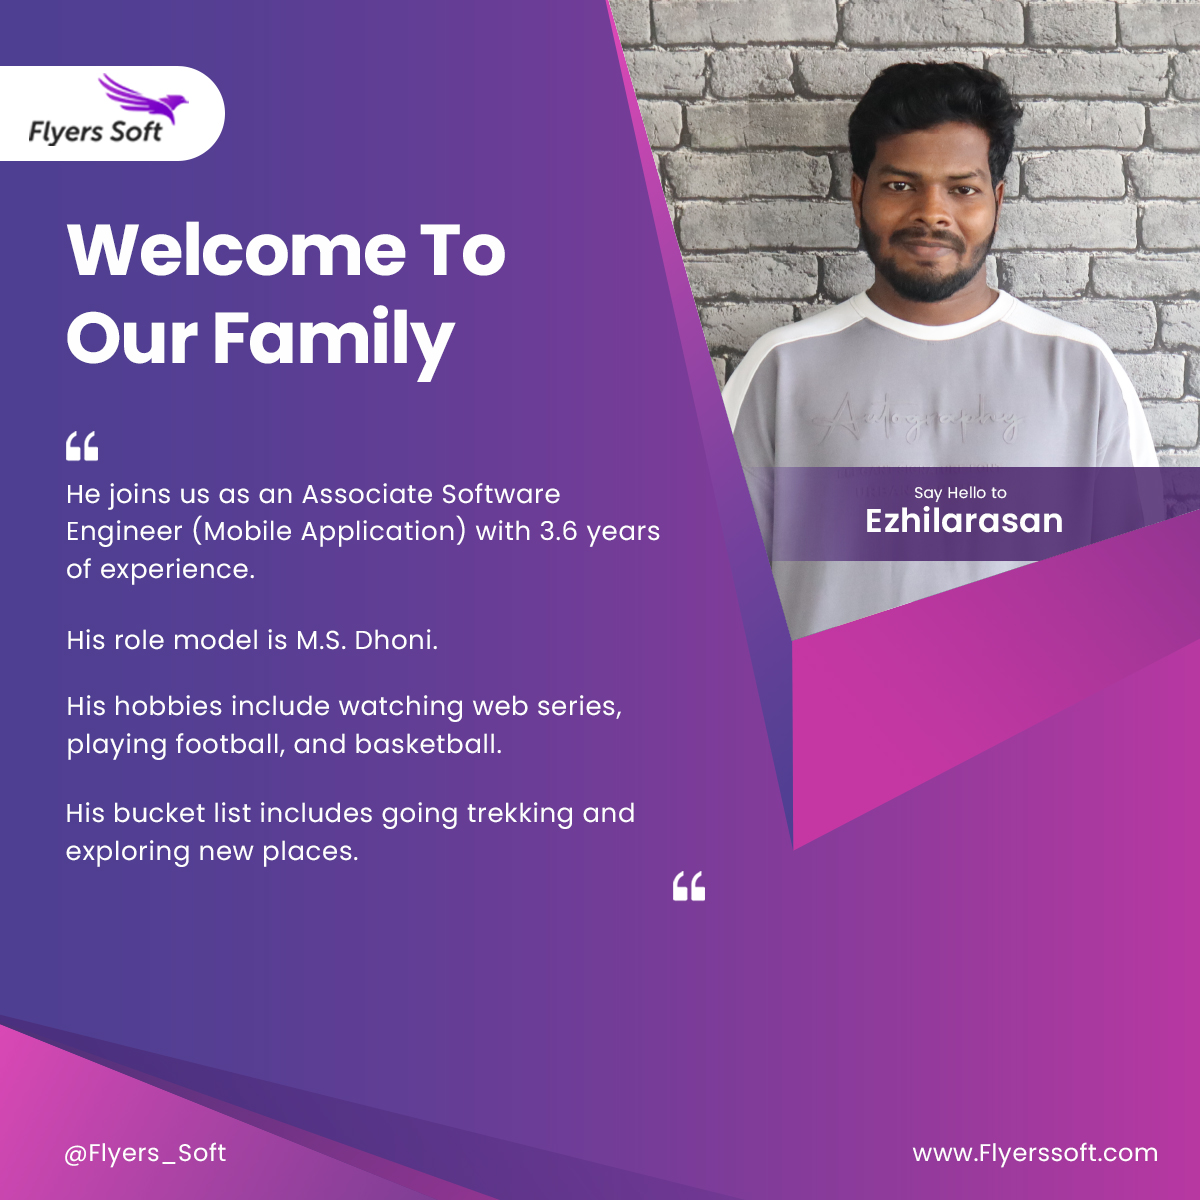 @FlyersSoft would like to welcome our new team member 'Ezhilarasan' who has joined us recently.

We are excited to have you with us and we look forward to sharing many successes. Welcome on board!
.

#flyerssoft #newjoinee #newjourney #newjoiner #freshstart #Flyerssoftfamily